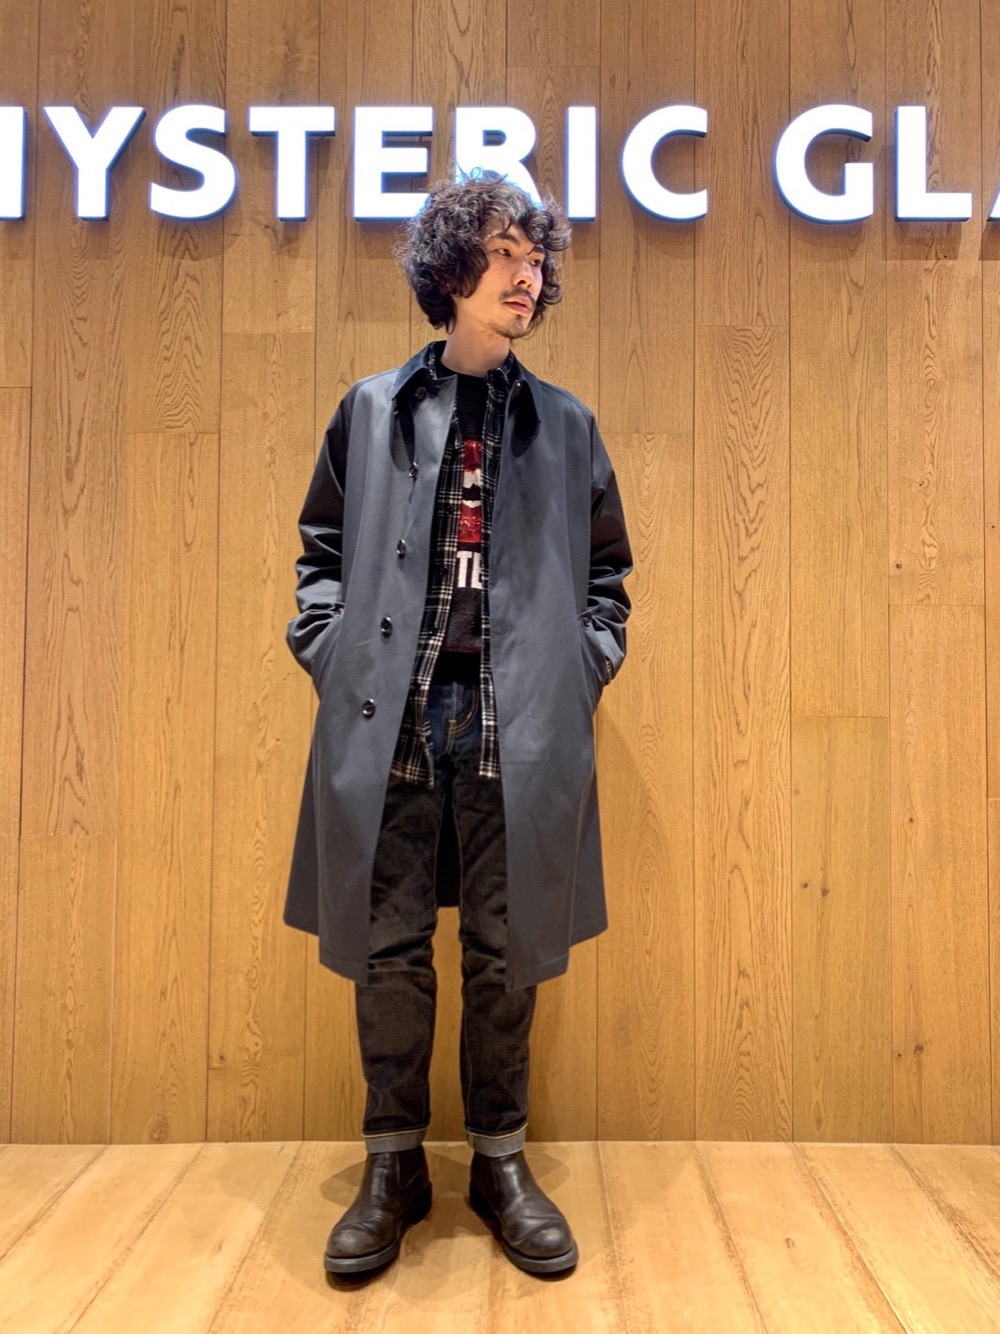 HYSTERIC GLAMOURマロニエゲート銀座1店ikechan / HYSTERIC GLAMOUR ...